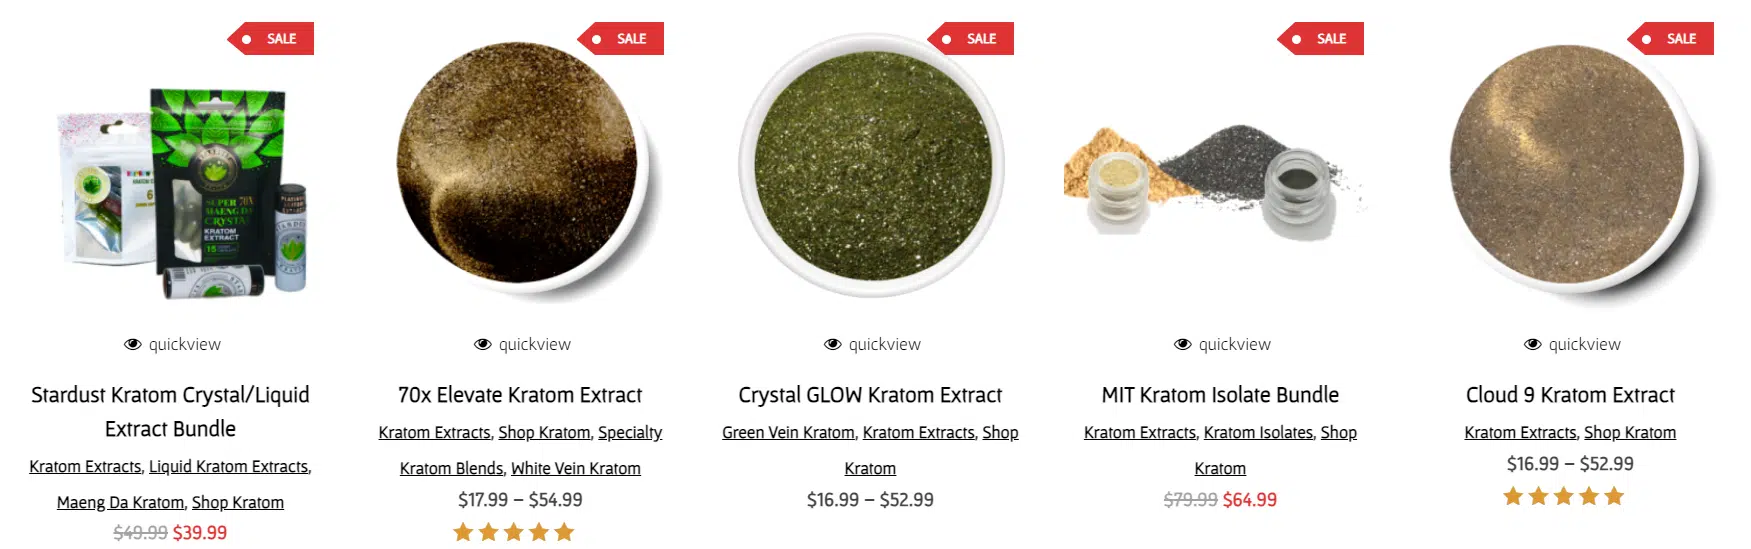 image of stardust kratom products